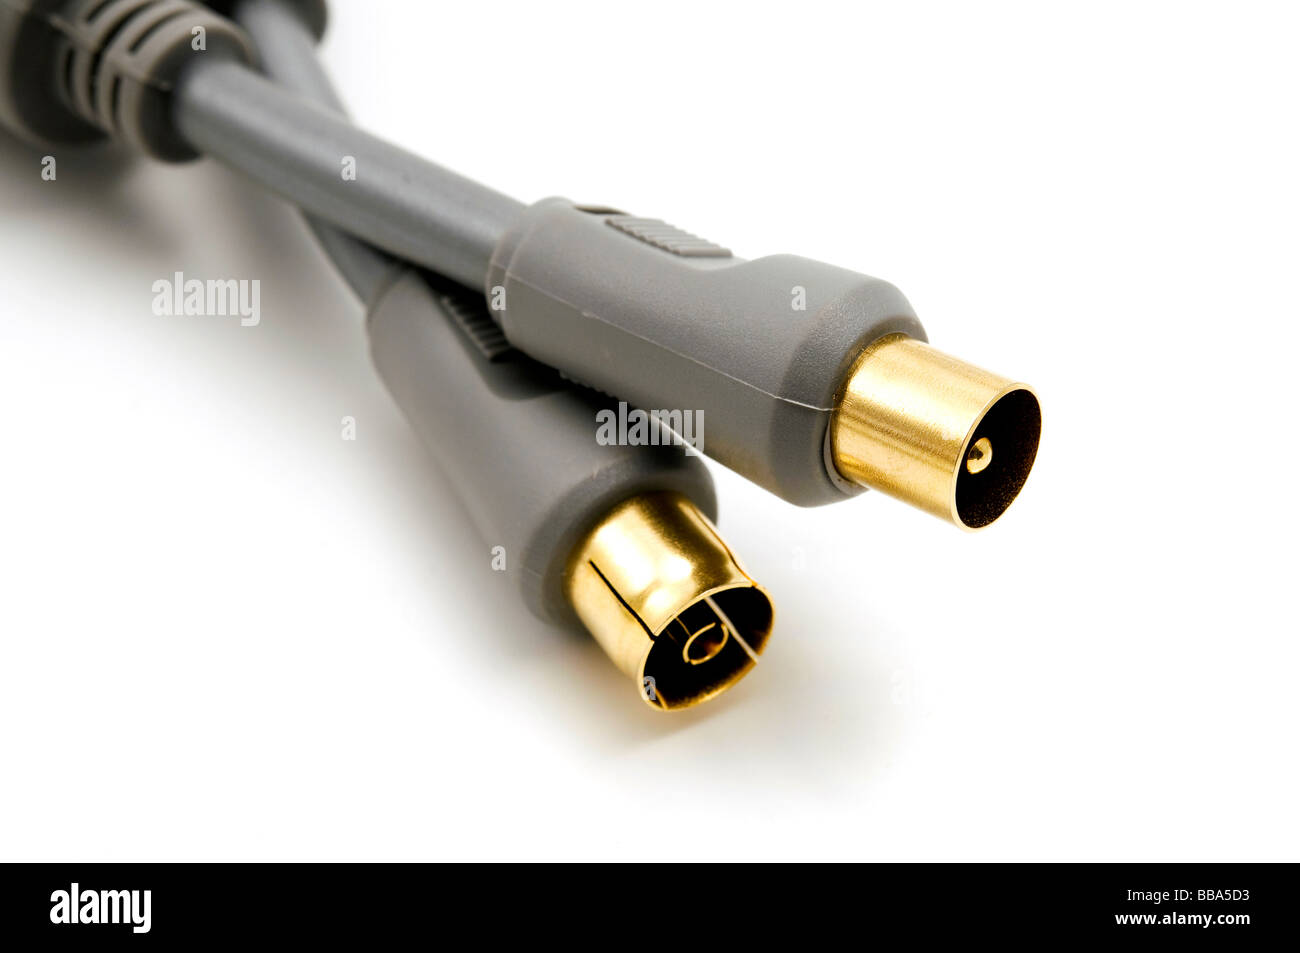 Gold plated cables on a white background Stock Photo